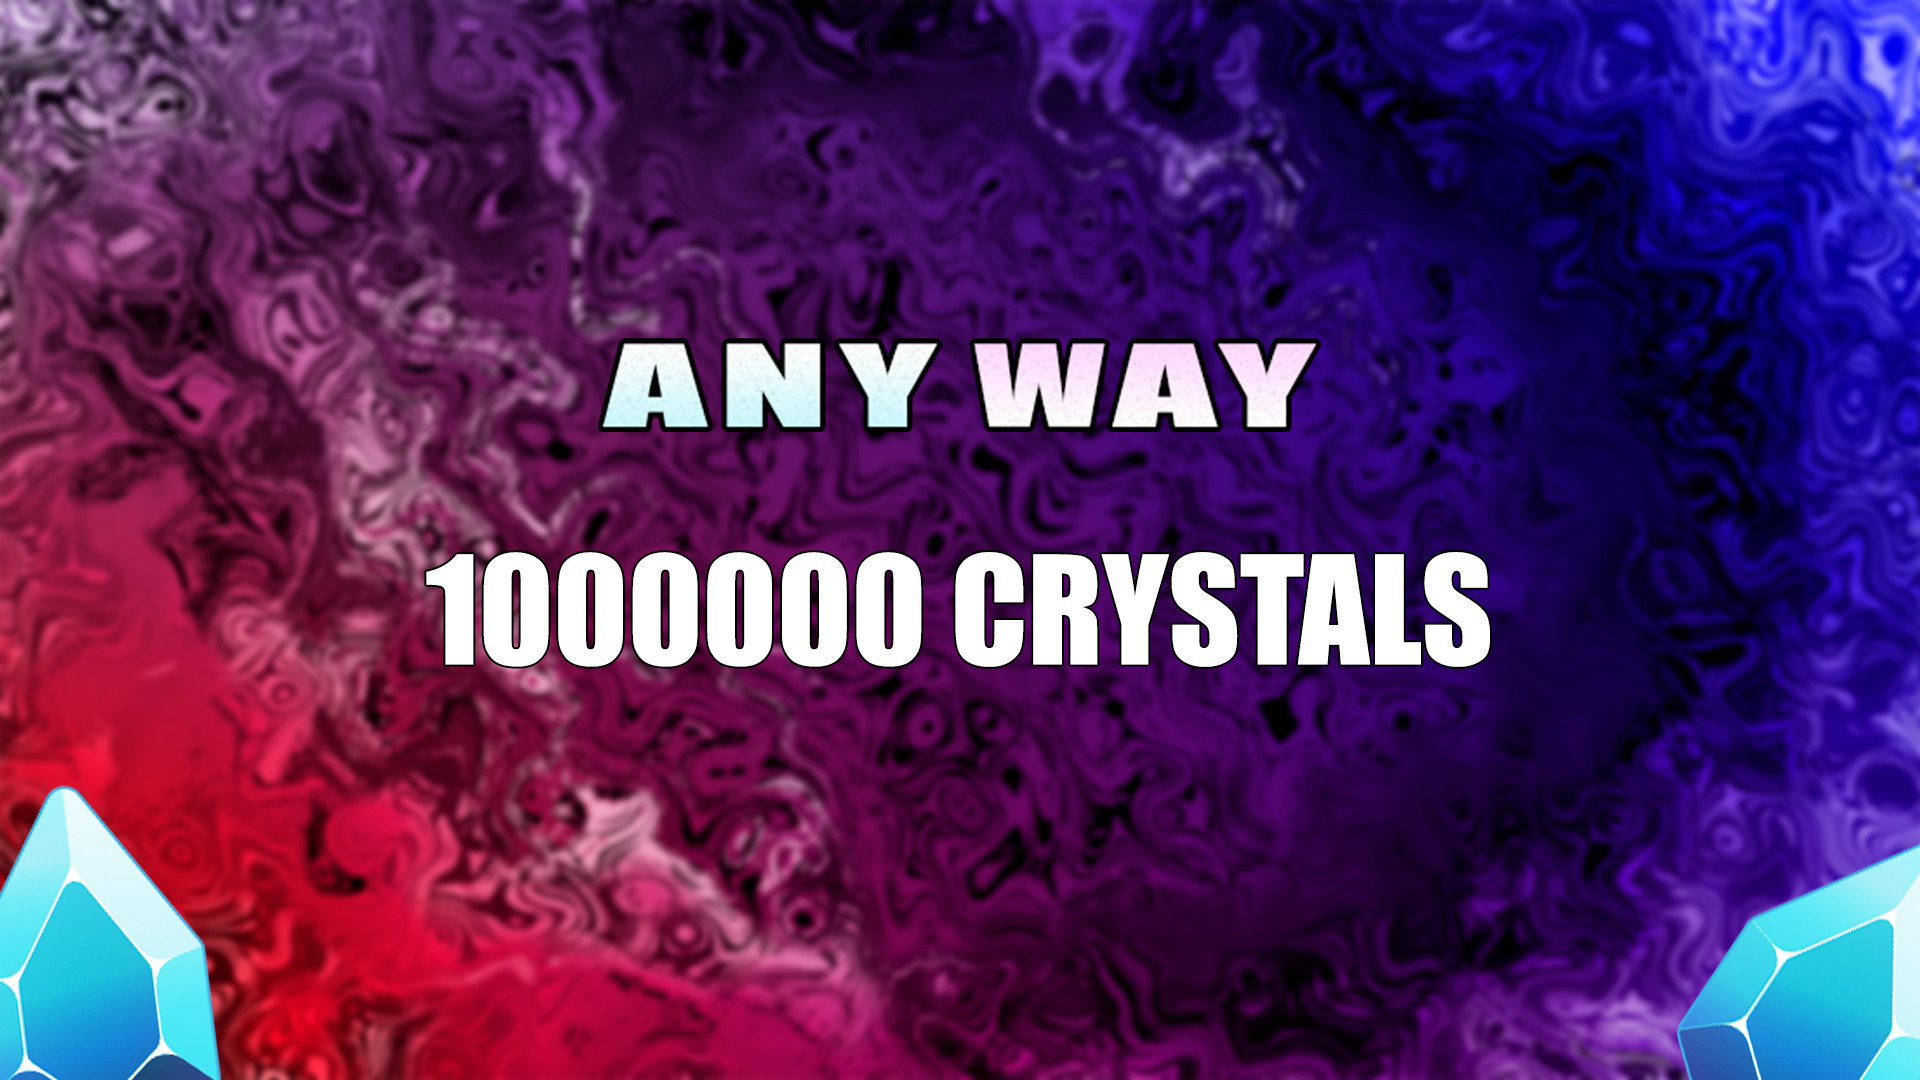 AnyWay! - 1,000,000 crystals Featured Screenshot #1